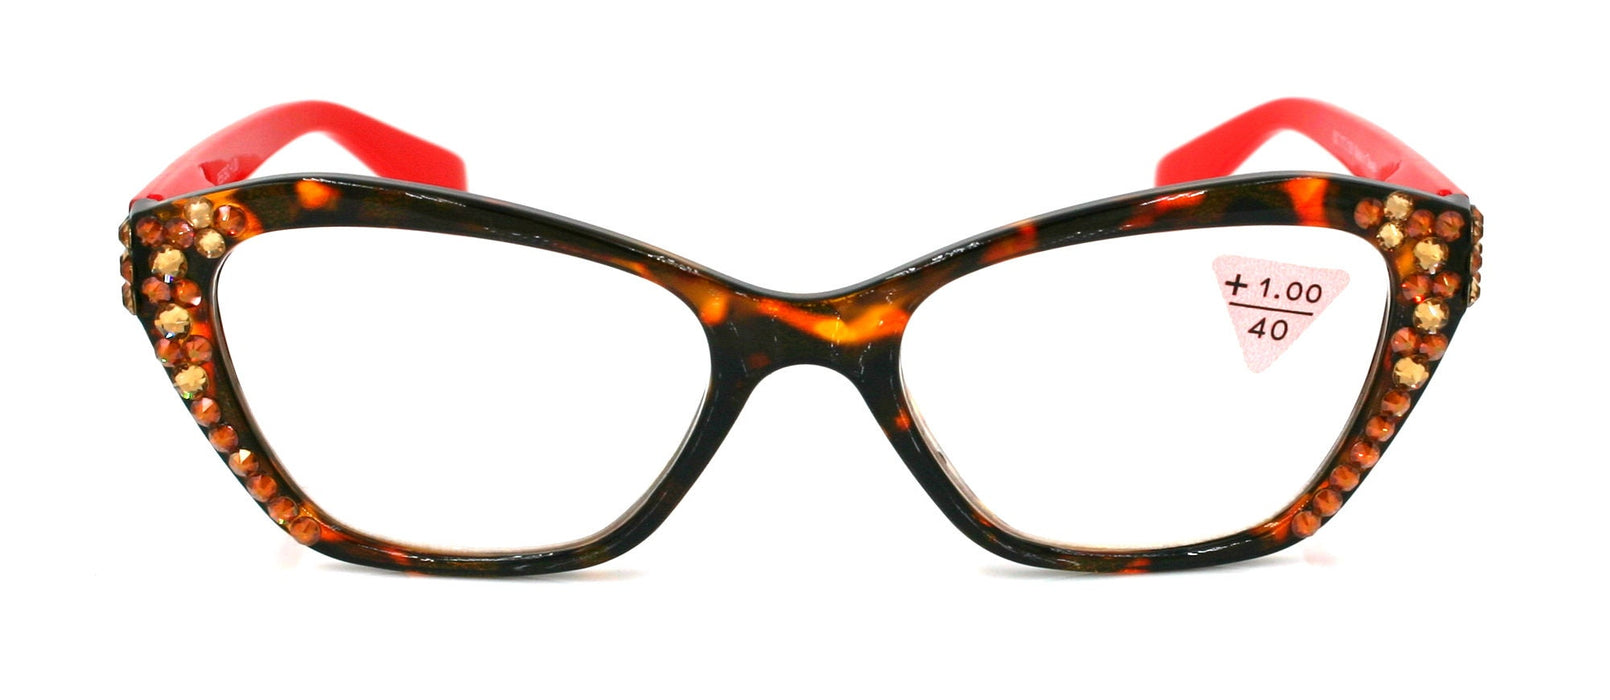 Jane, (Bling) Women Reading Glasses W (L. Colorado, Cooper) Genuine European Crystals, Cat Eyes (Red Brown) Tortoise Shell. NY Fifth Avenue